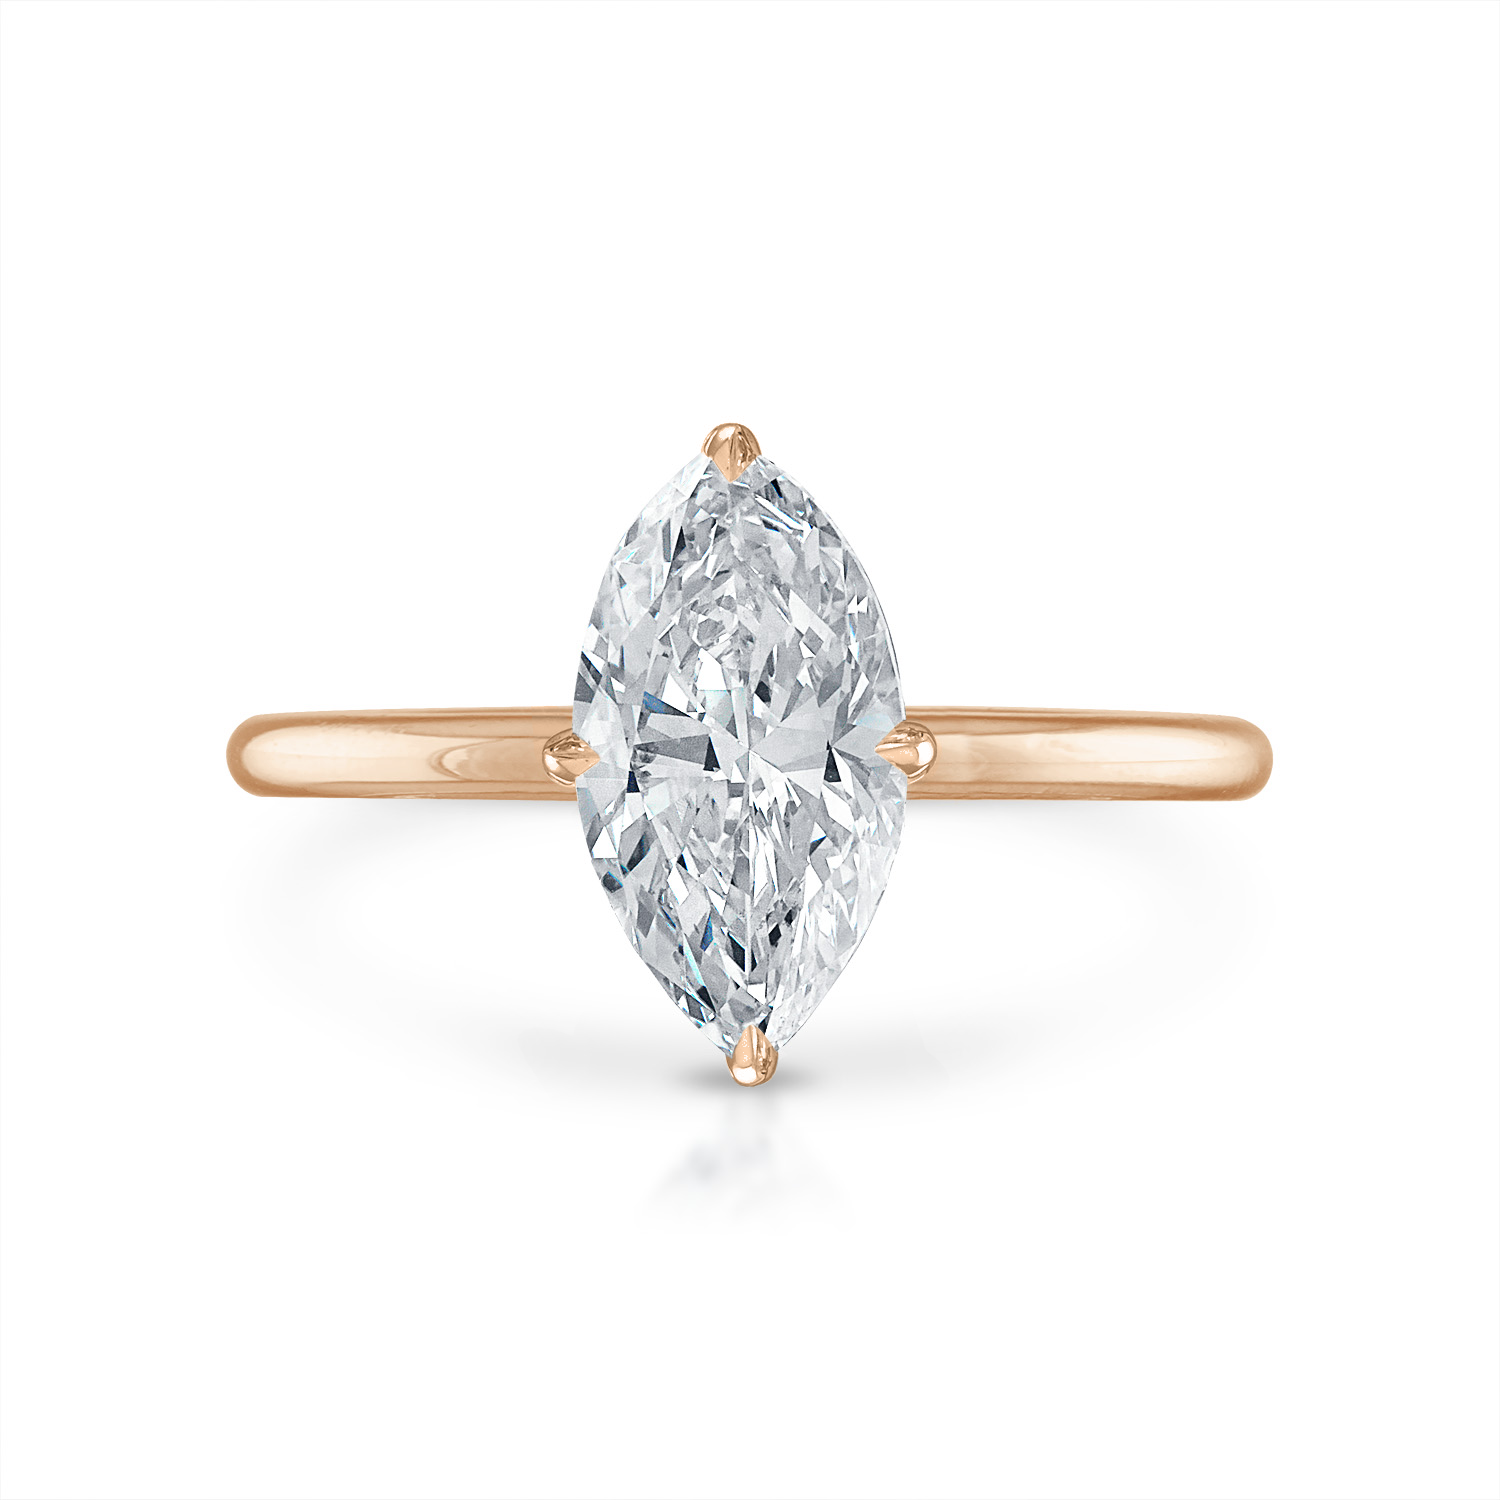 Marquise Solitaire Engagement Ring in Rose Gold